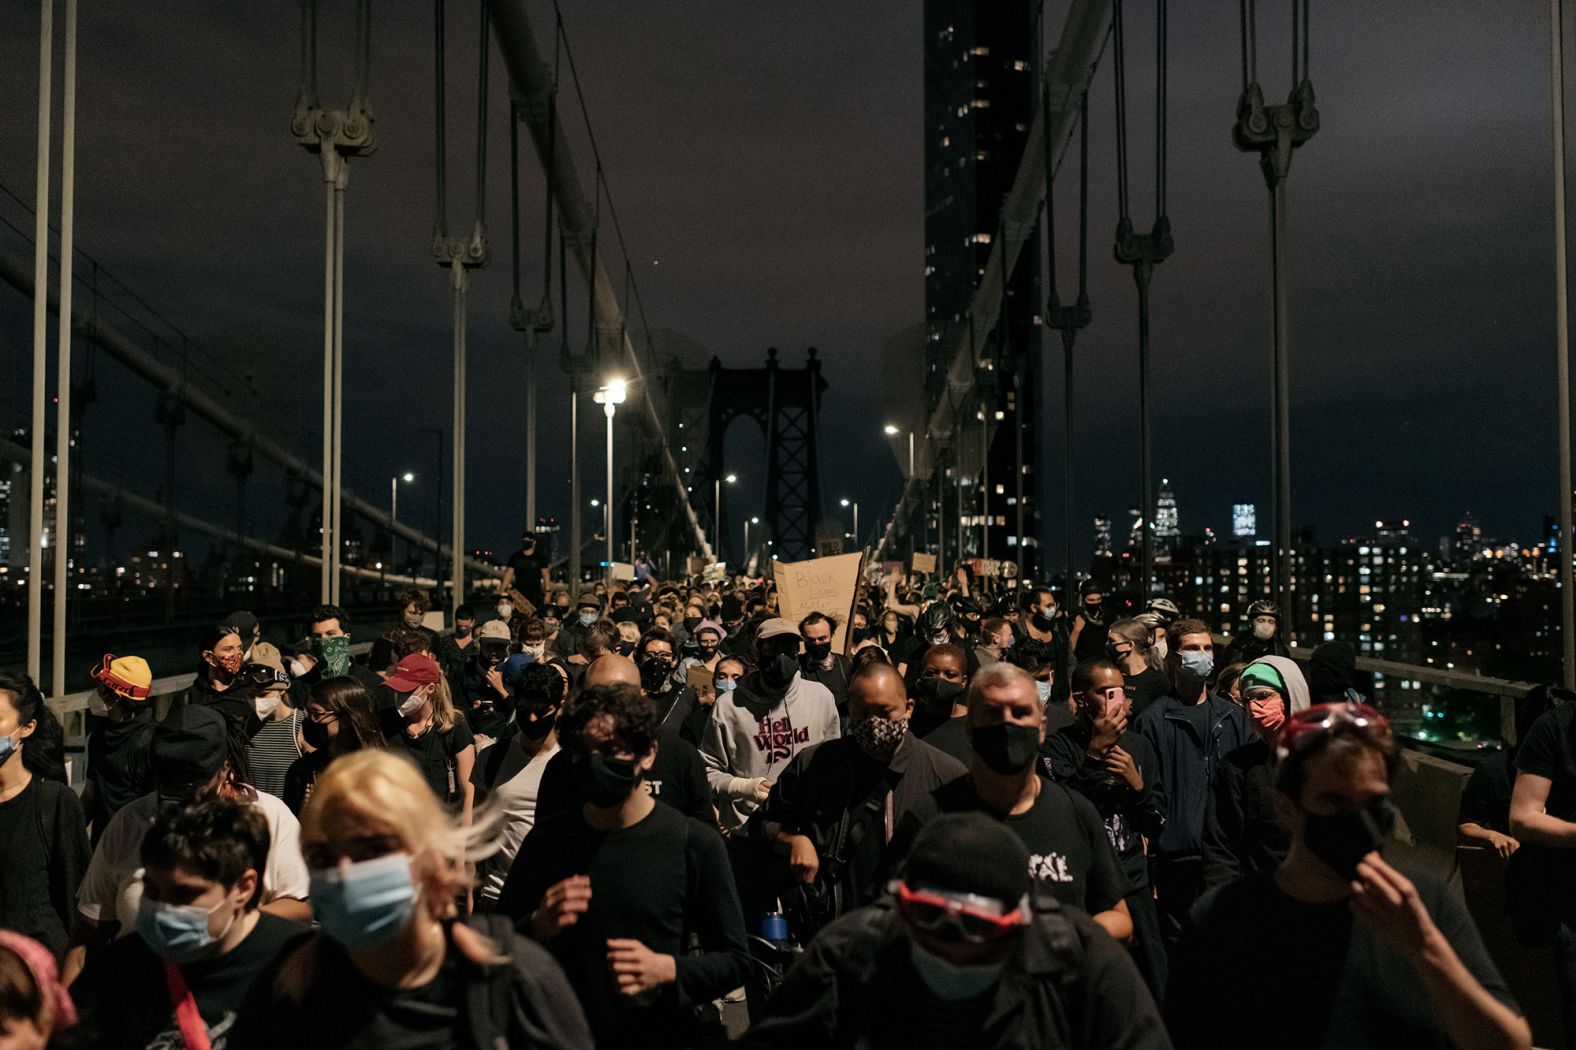 Protesters walk off the Manhattan Bridge in New York after being blocked by police on June 2. Police were on both sides of the bridge as peaceful protesters were in the middle. Eventually the protesters <a href="index.php?page=&url=https%3A%2F%2Fwww.cnn.com%2Fus%2Flive-news%2Fgeorge-floyd-protests-06-02-20%2Fh_b48733561b13603cd862ae3563a498b3" target="_blank">were allowed to walk away</a> and leave the area. 